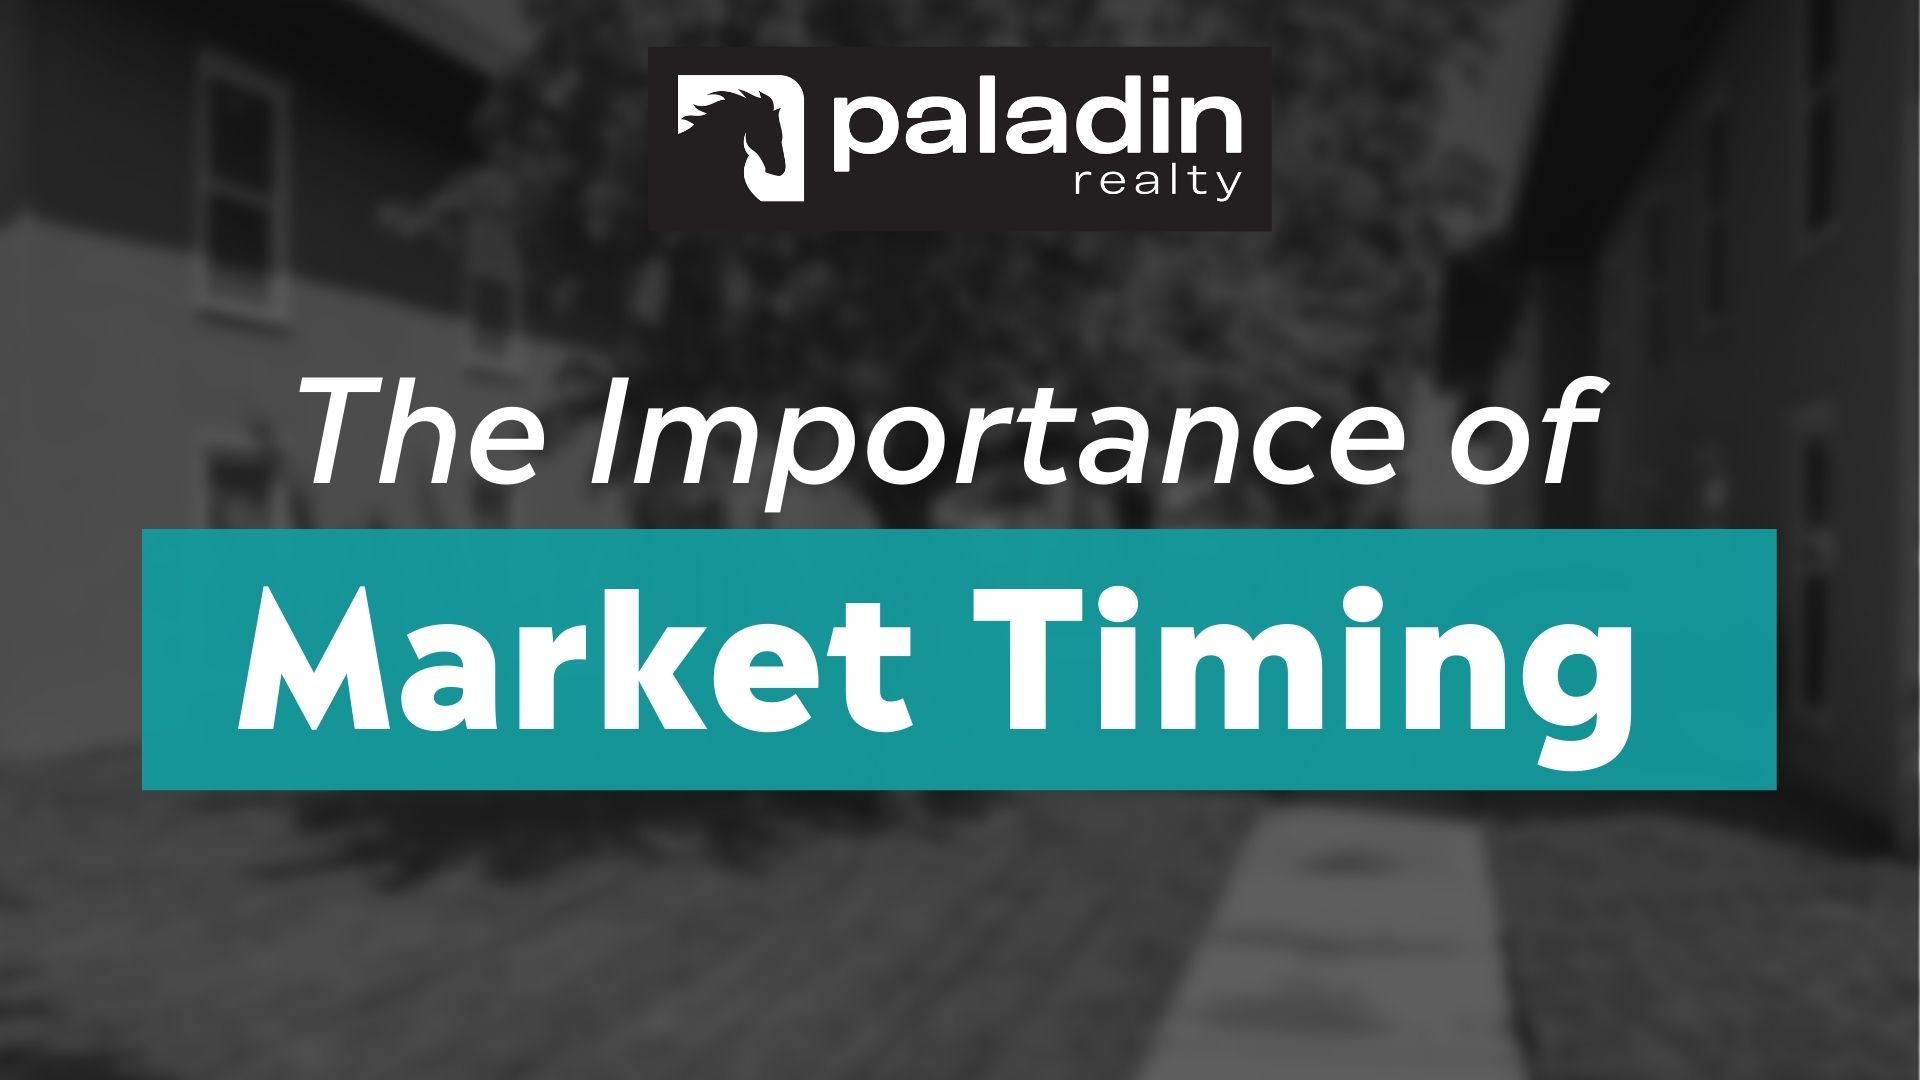 FI [Web] - The Importance of Market Timing